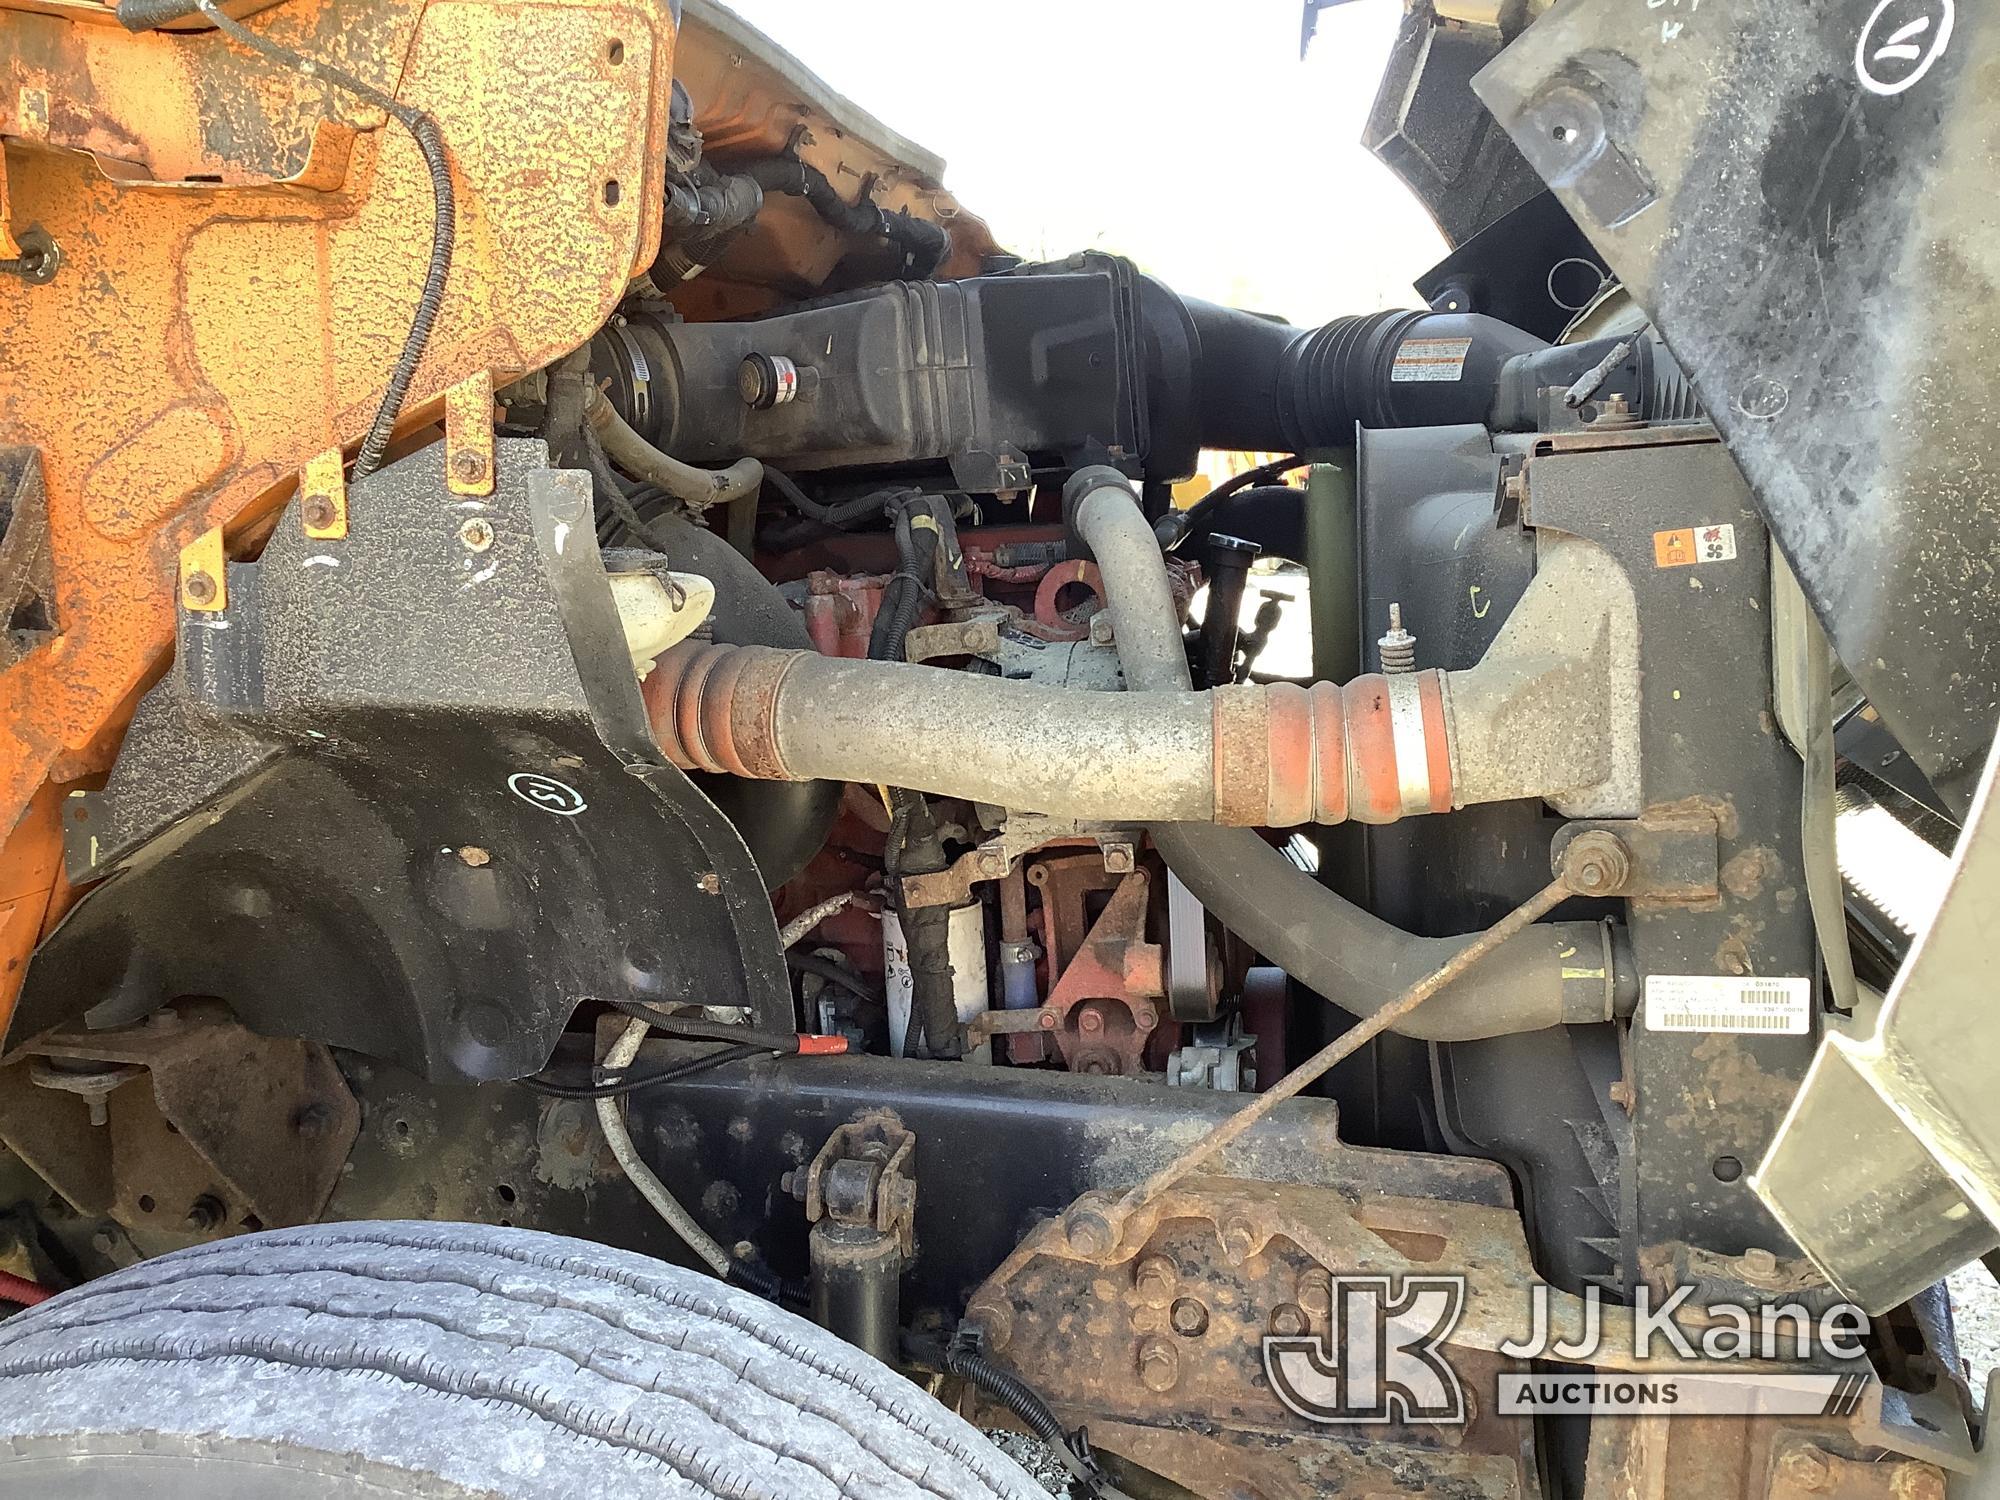 (Smock, PA) Altec LR756, Over-Center Bucket Truck mounted behind cab on 2013 Ford F750 Chipper Dump